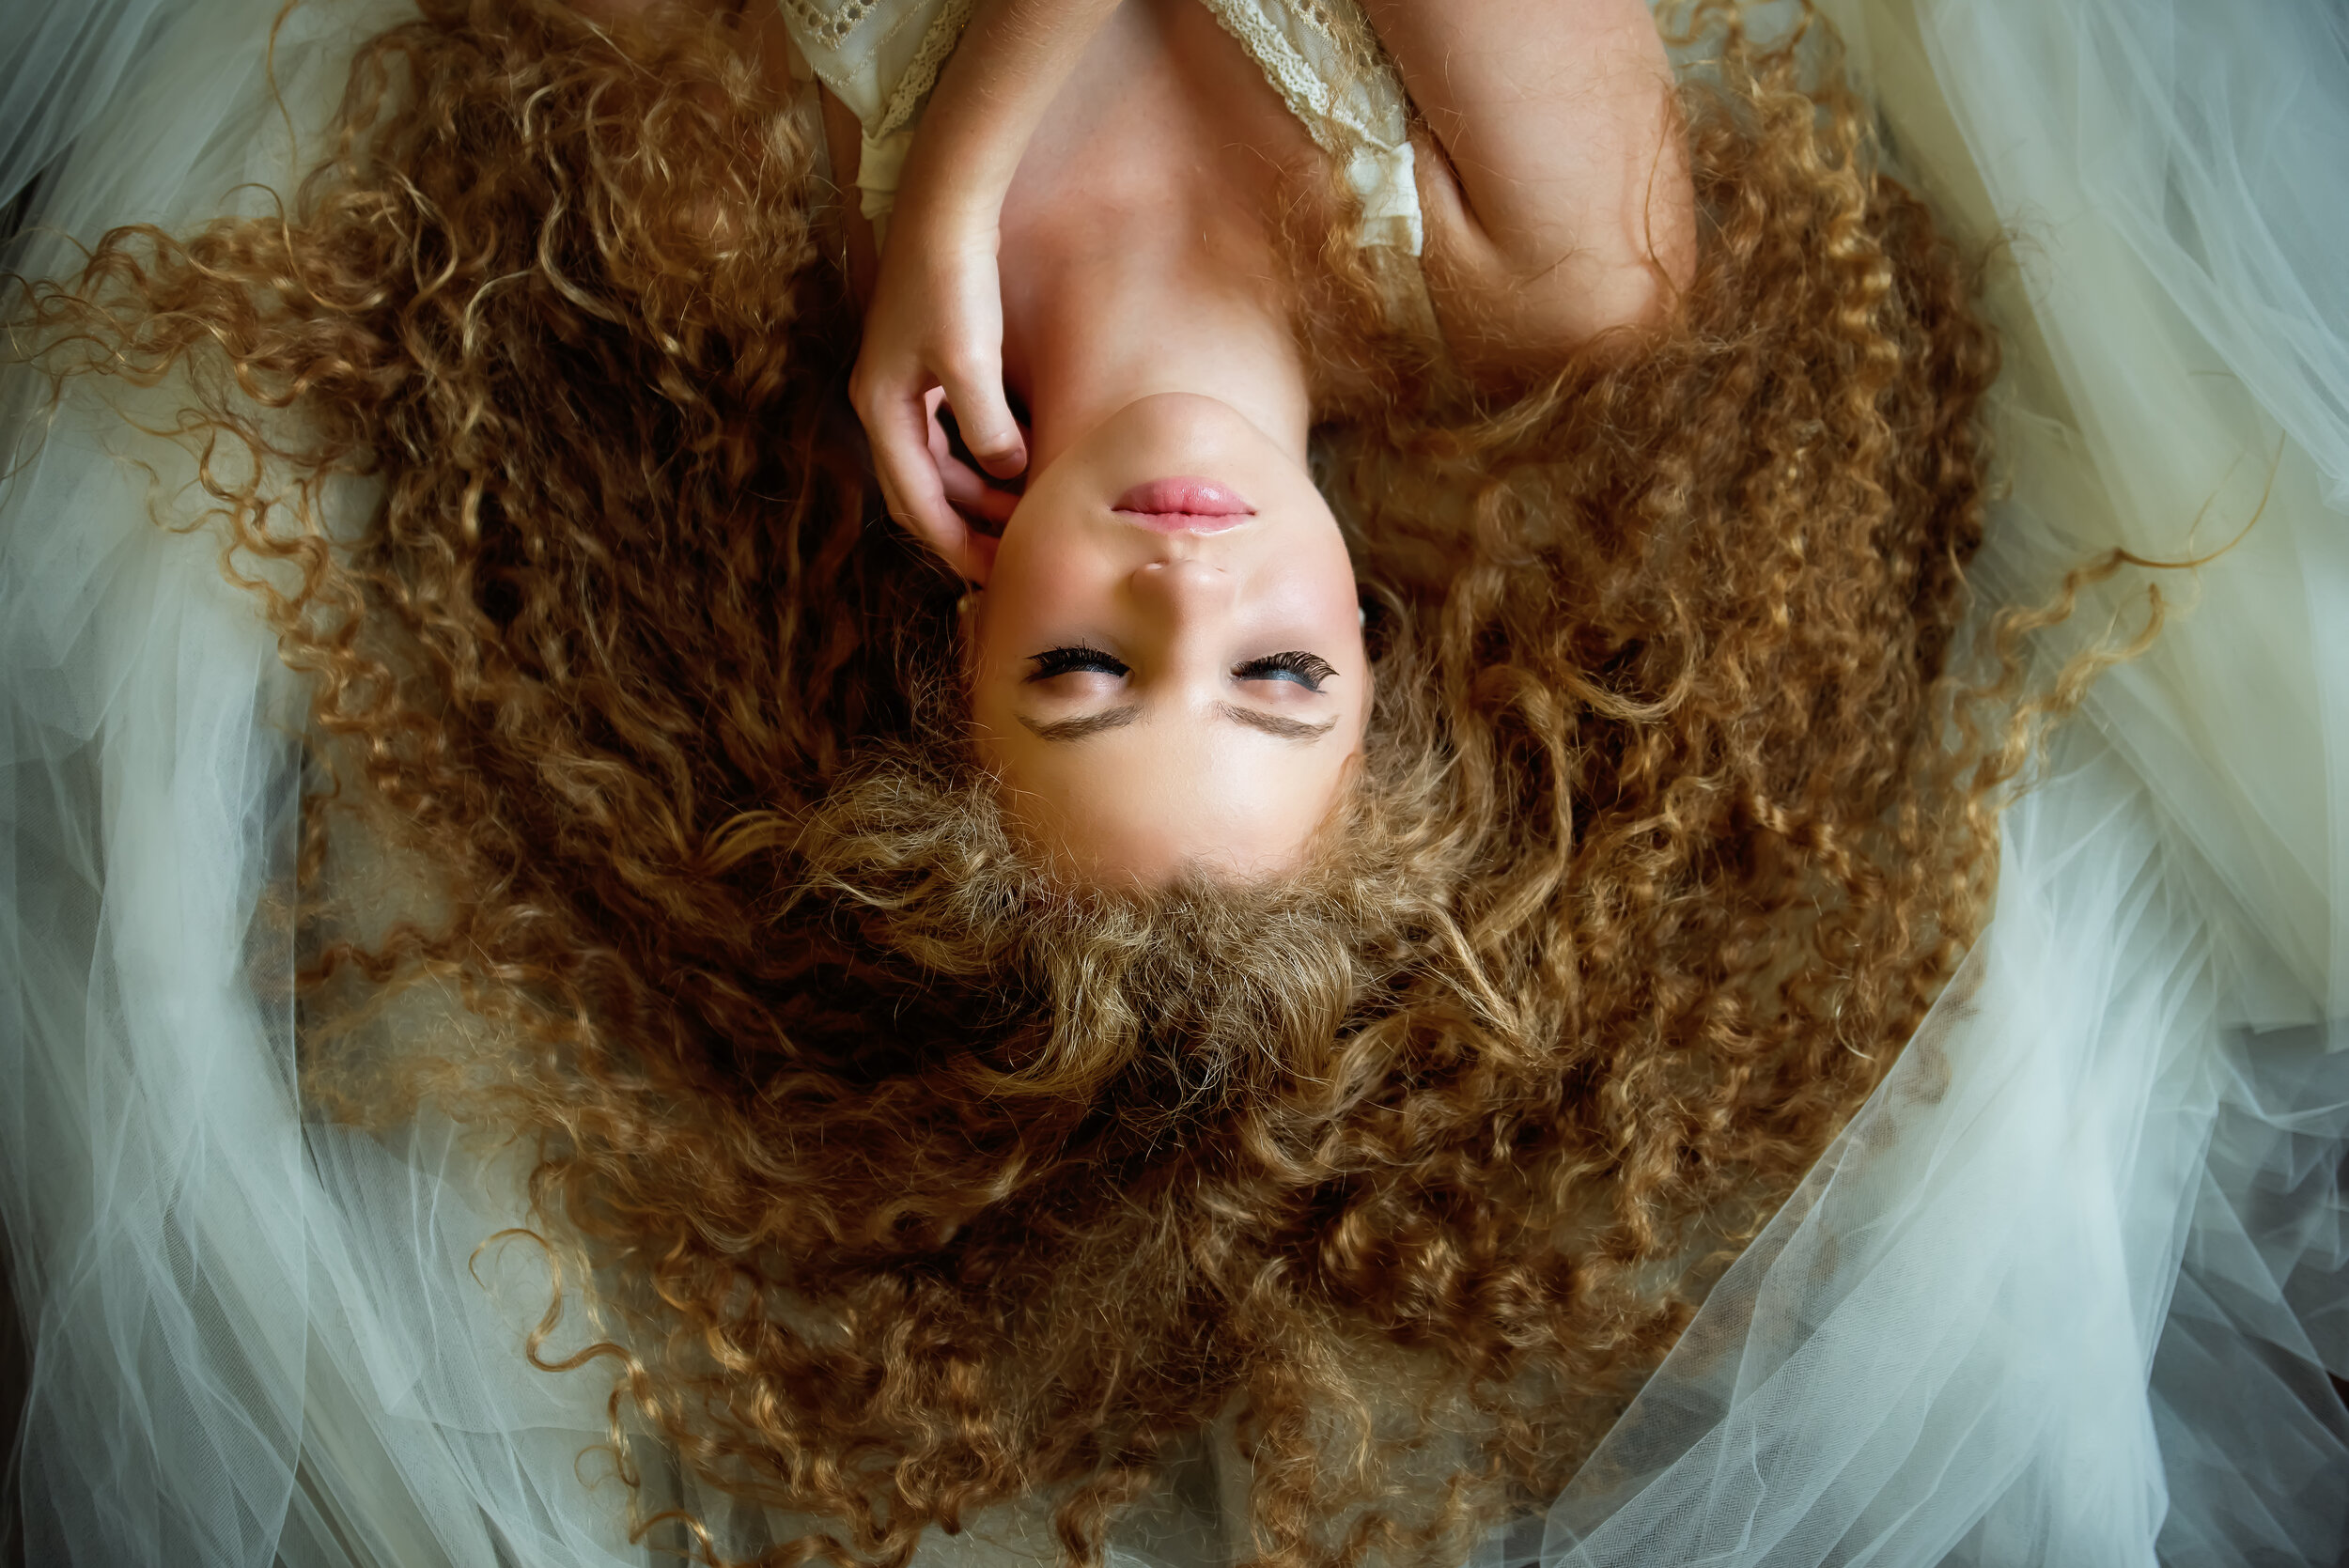  Camera angle from above, with a woman lying on her back on a white veil, eyes closed. 